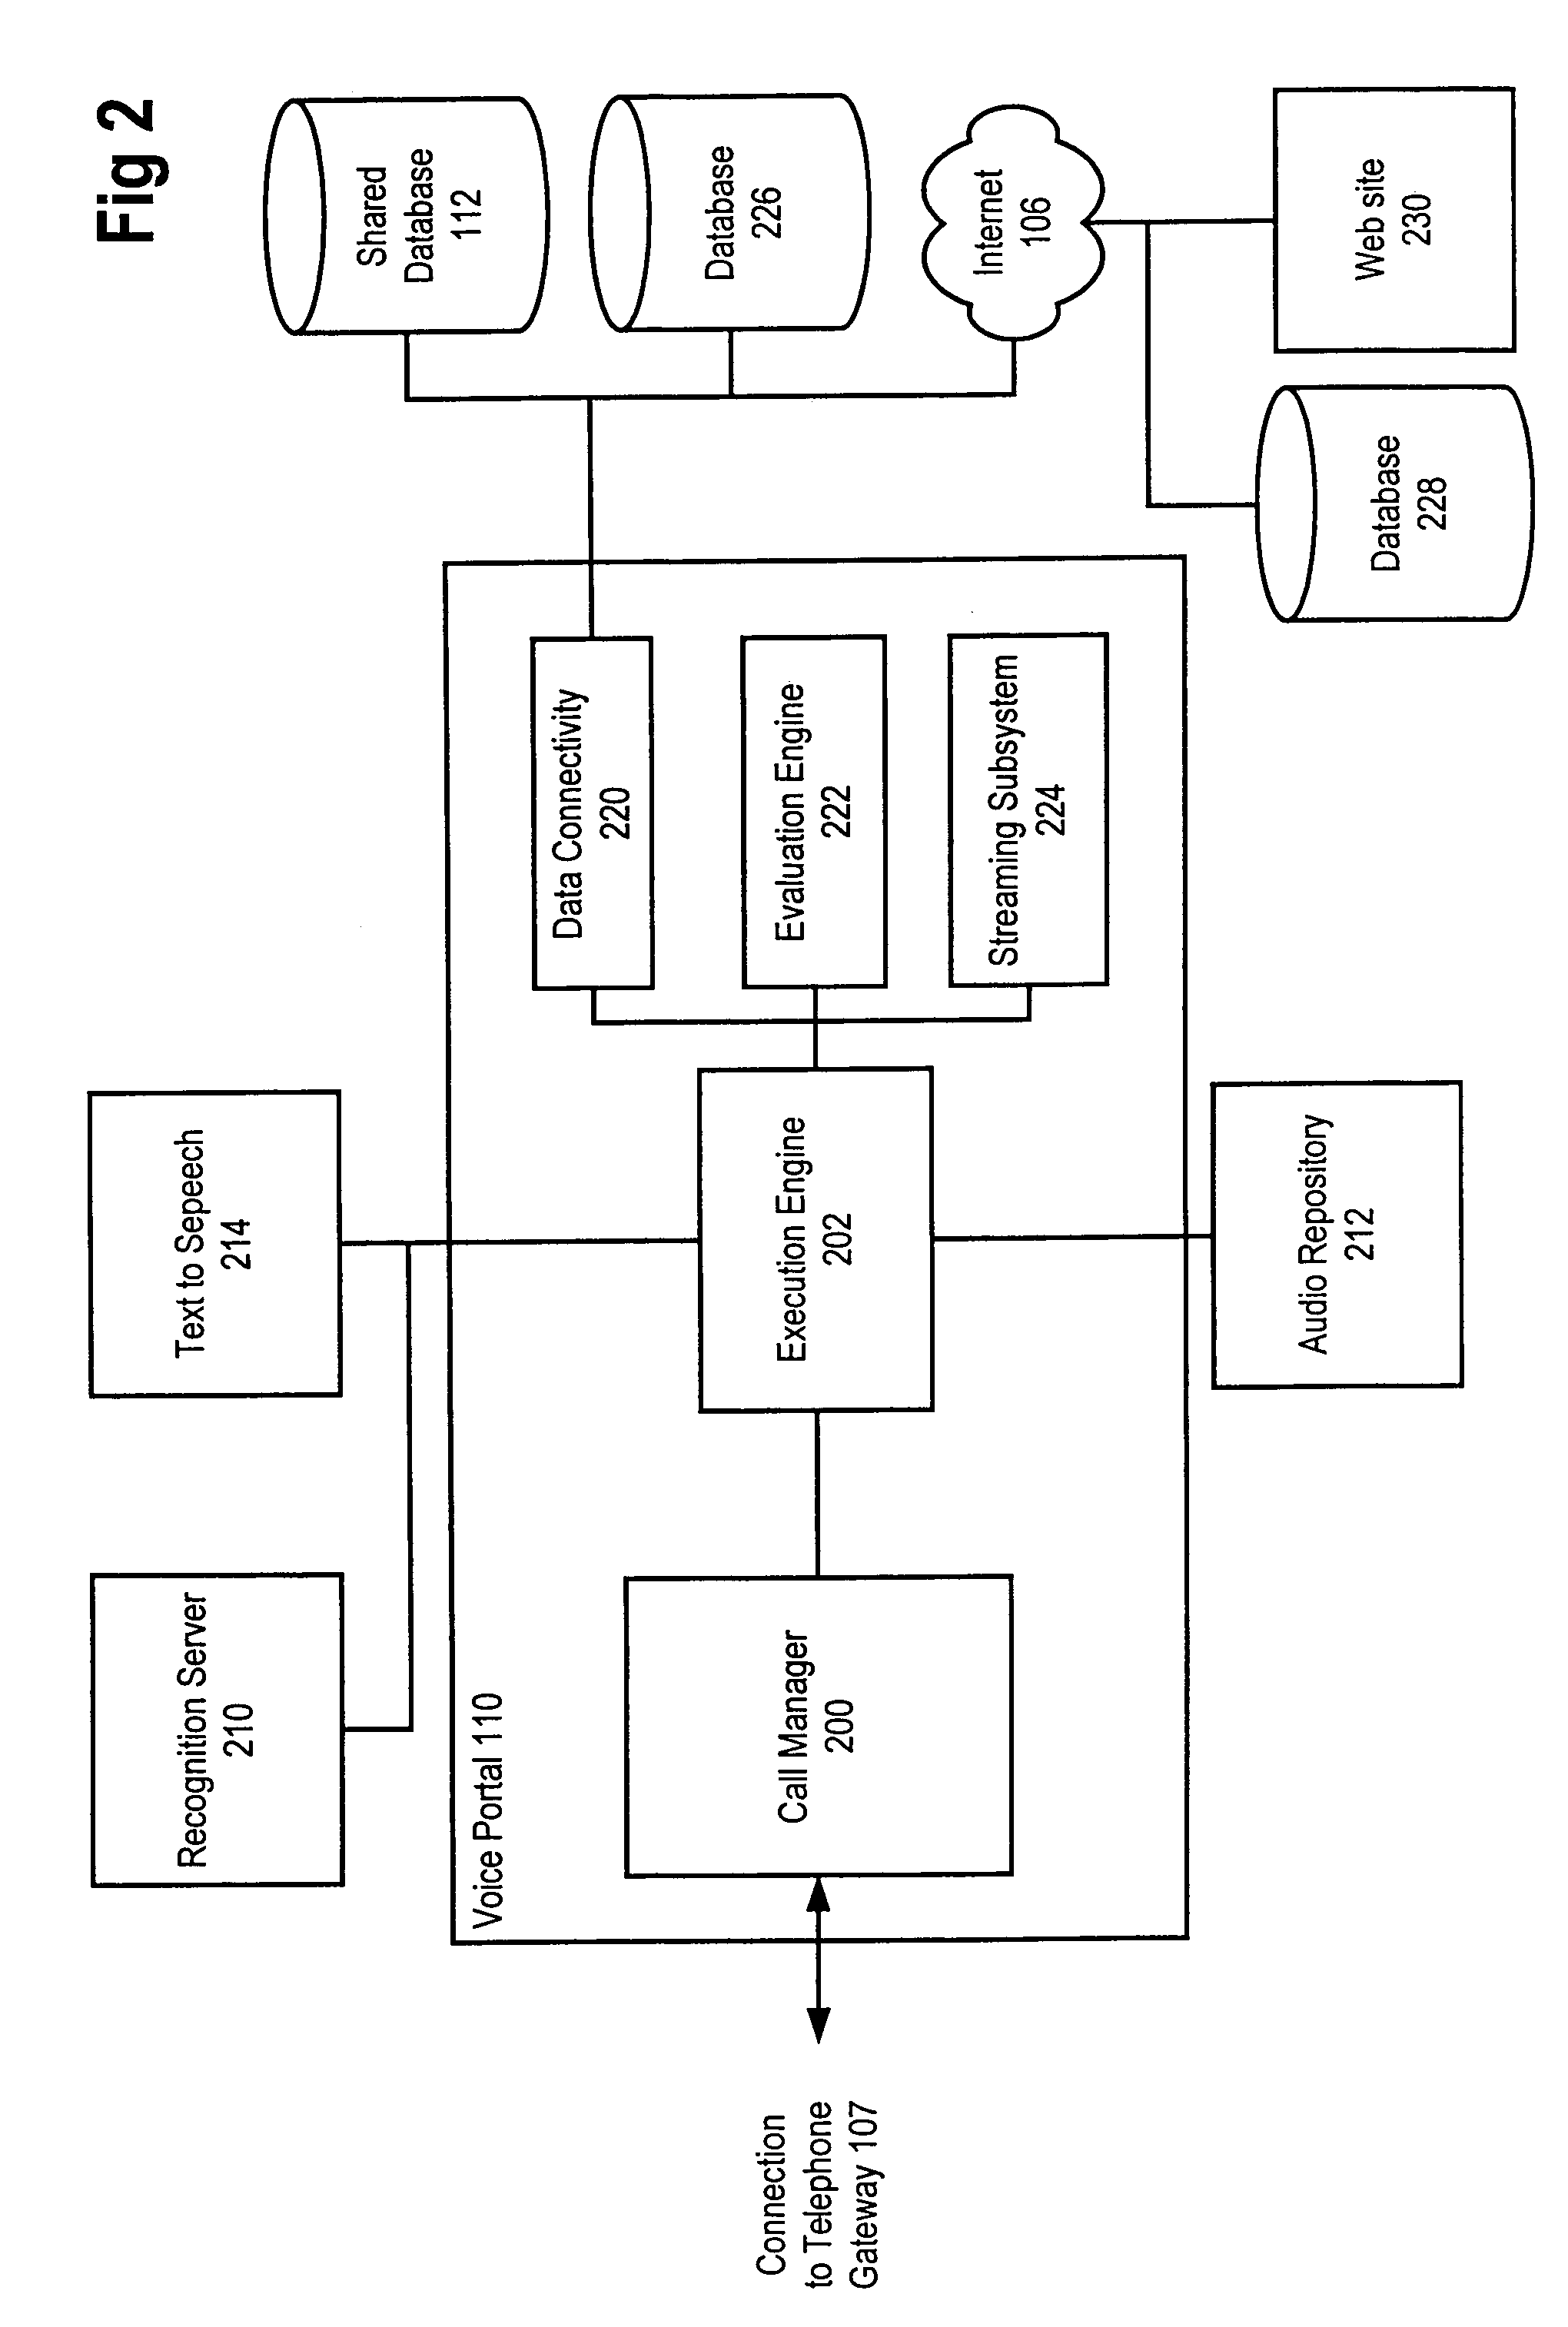 System for providing personalized content over a telephone interface to a user according to the corresponding personalization profile including the record of user actions or the record of user behavior